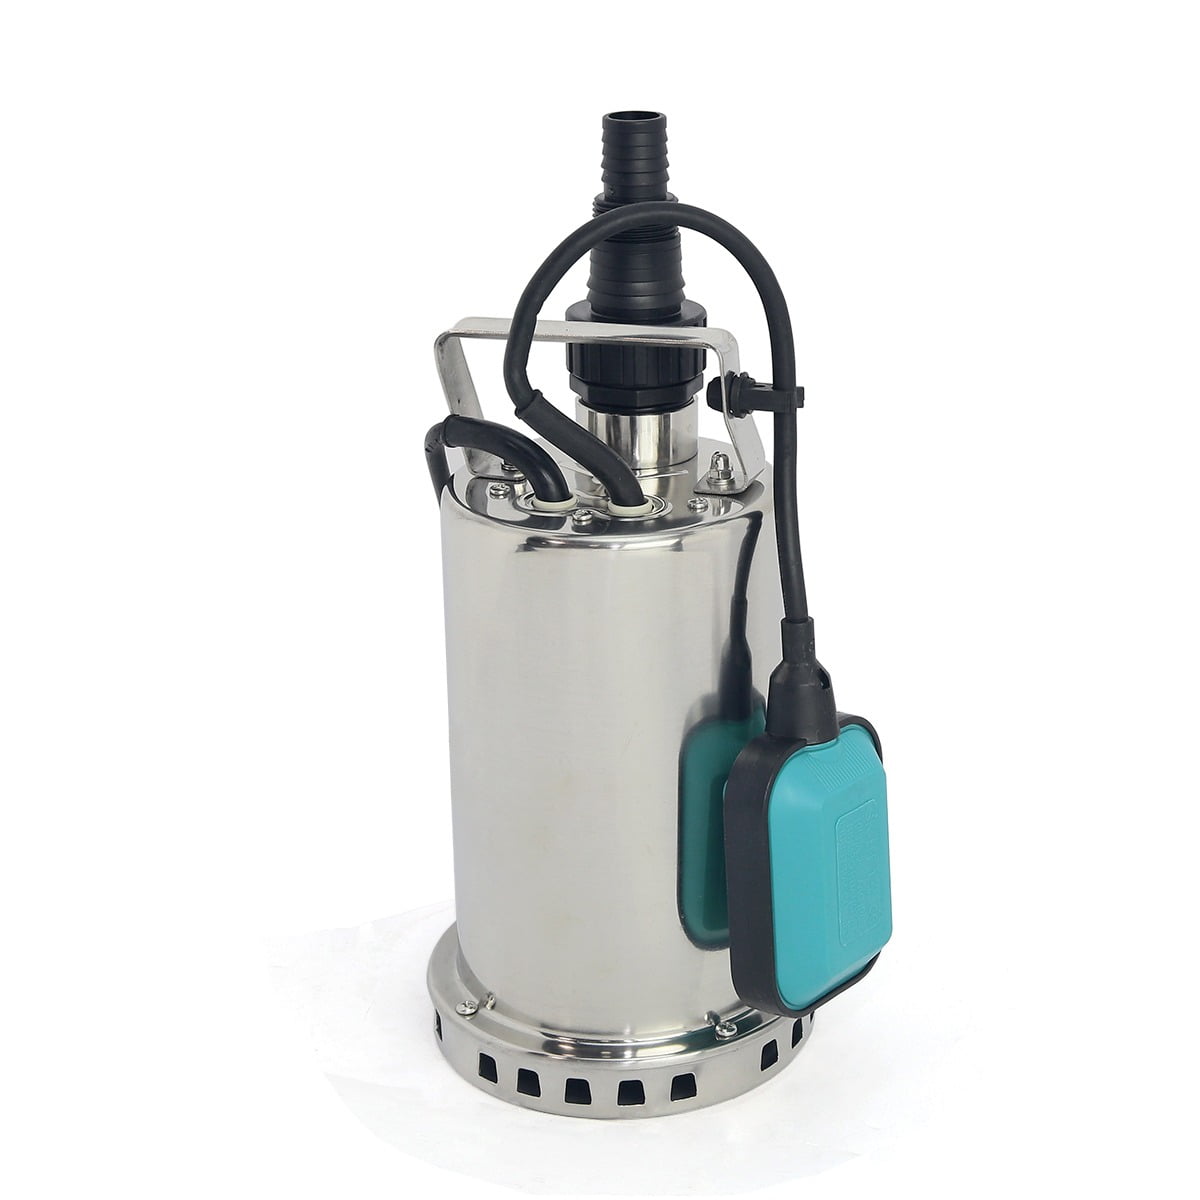 Details about   1HP Electric Submersible Water Pump Sump with Float Switch Portable B t s e 109 